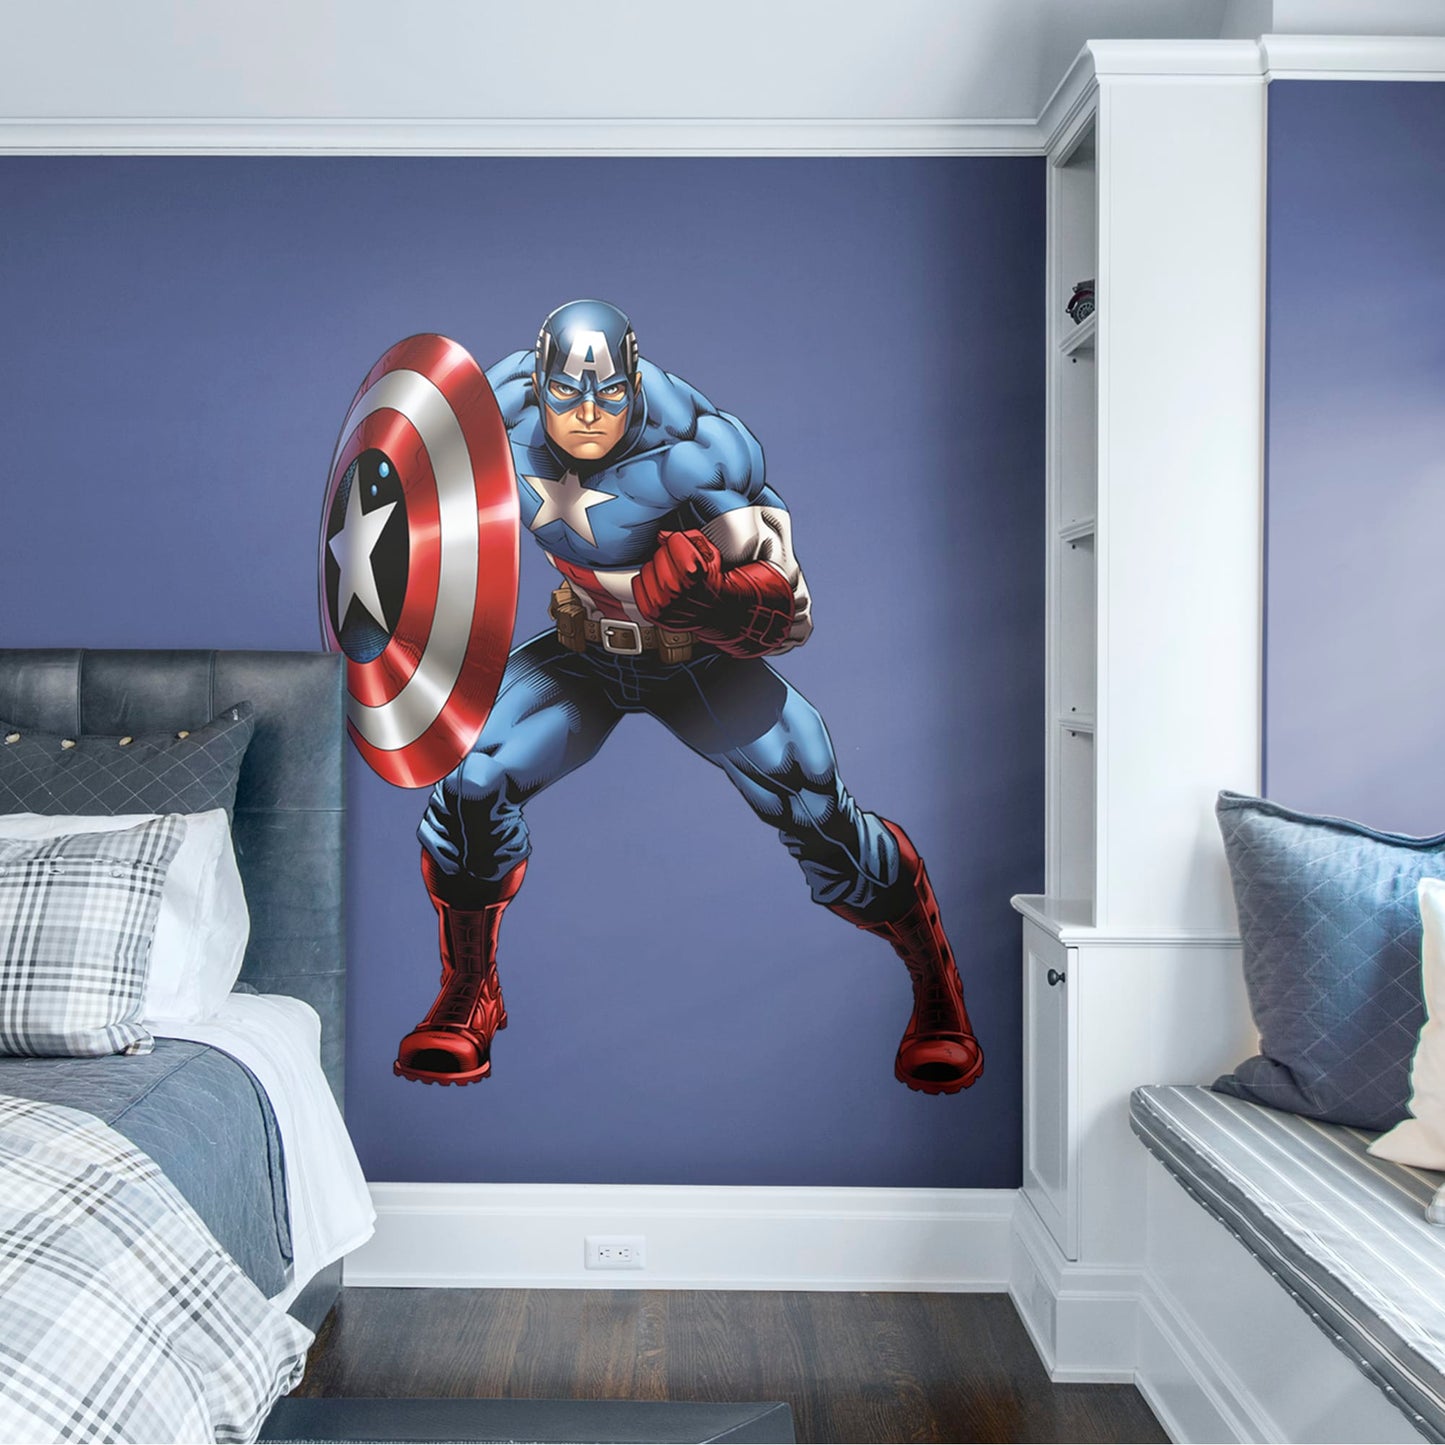 Captain America: Marvel's Avengers Assemble - Officially Licensed Removable Wall Decal